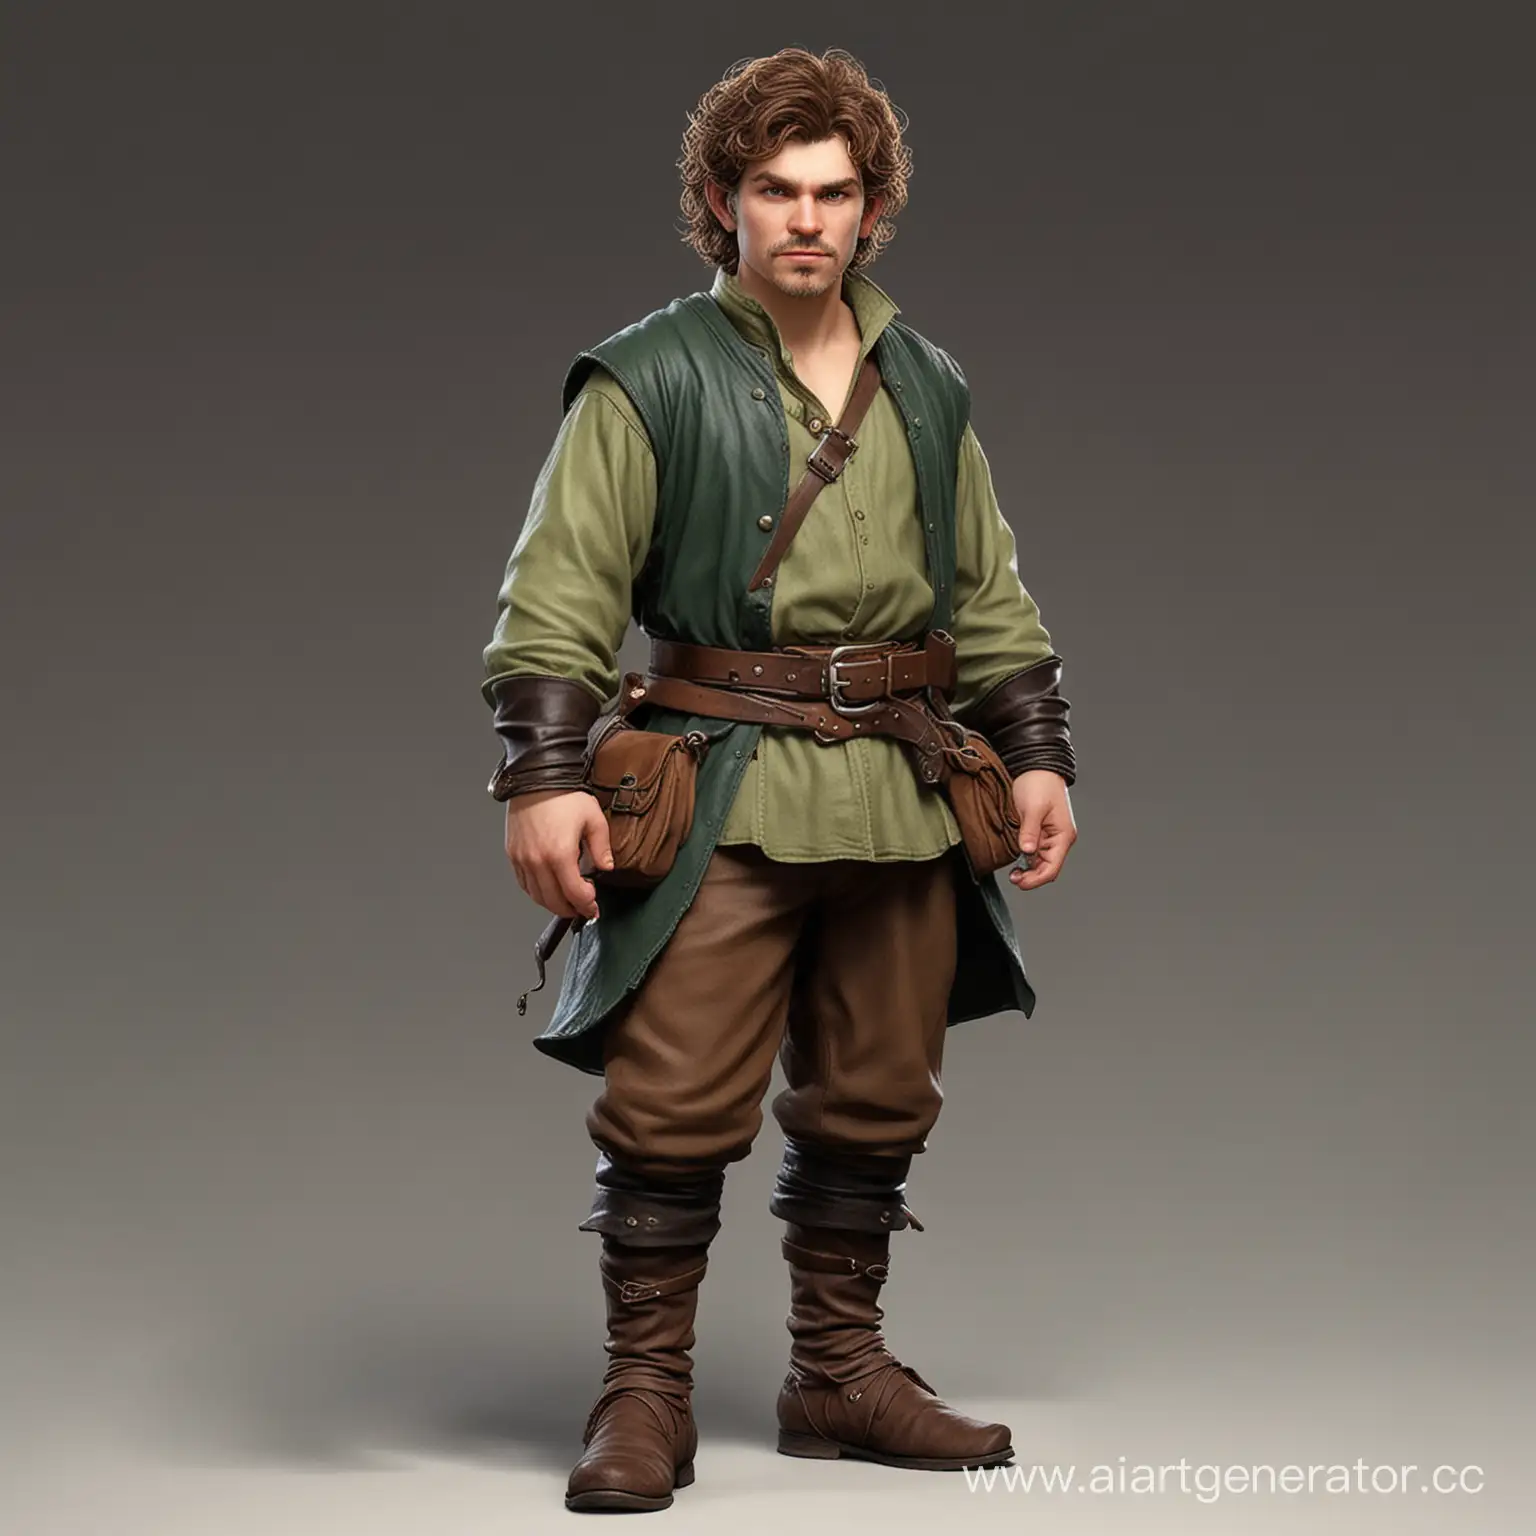 Halfling-Bard-with-Pistol-and-Lute-in-Medieval-Attire